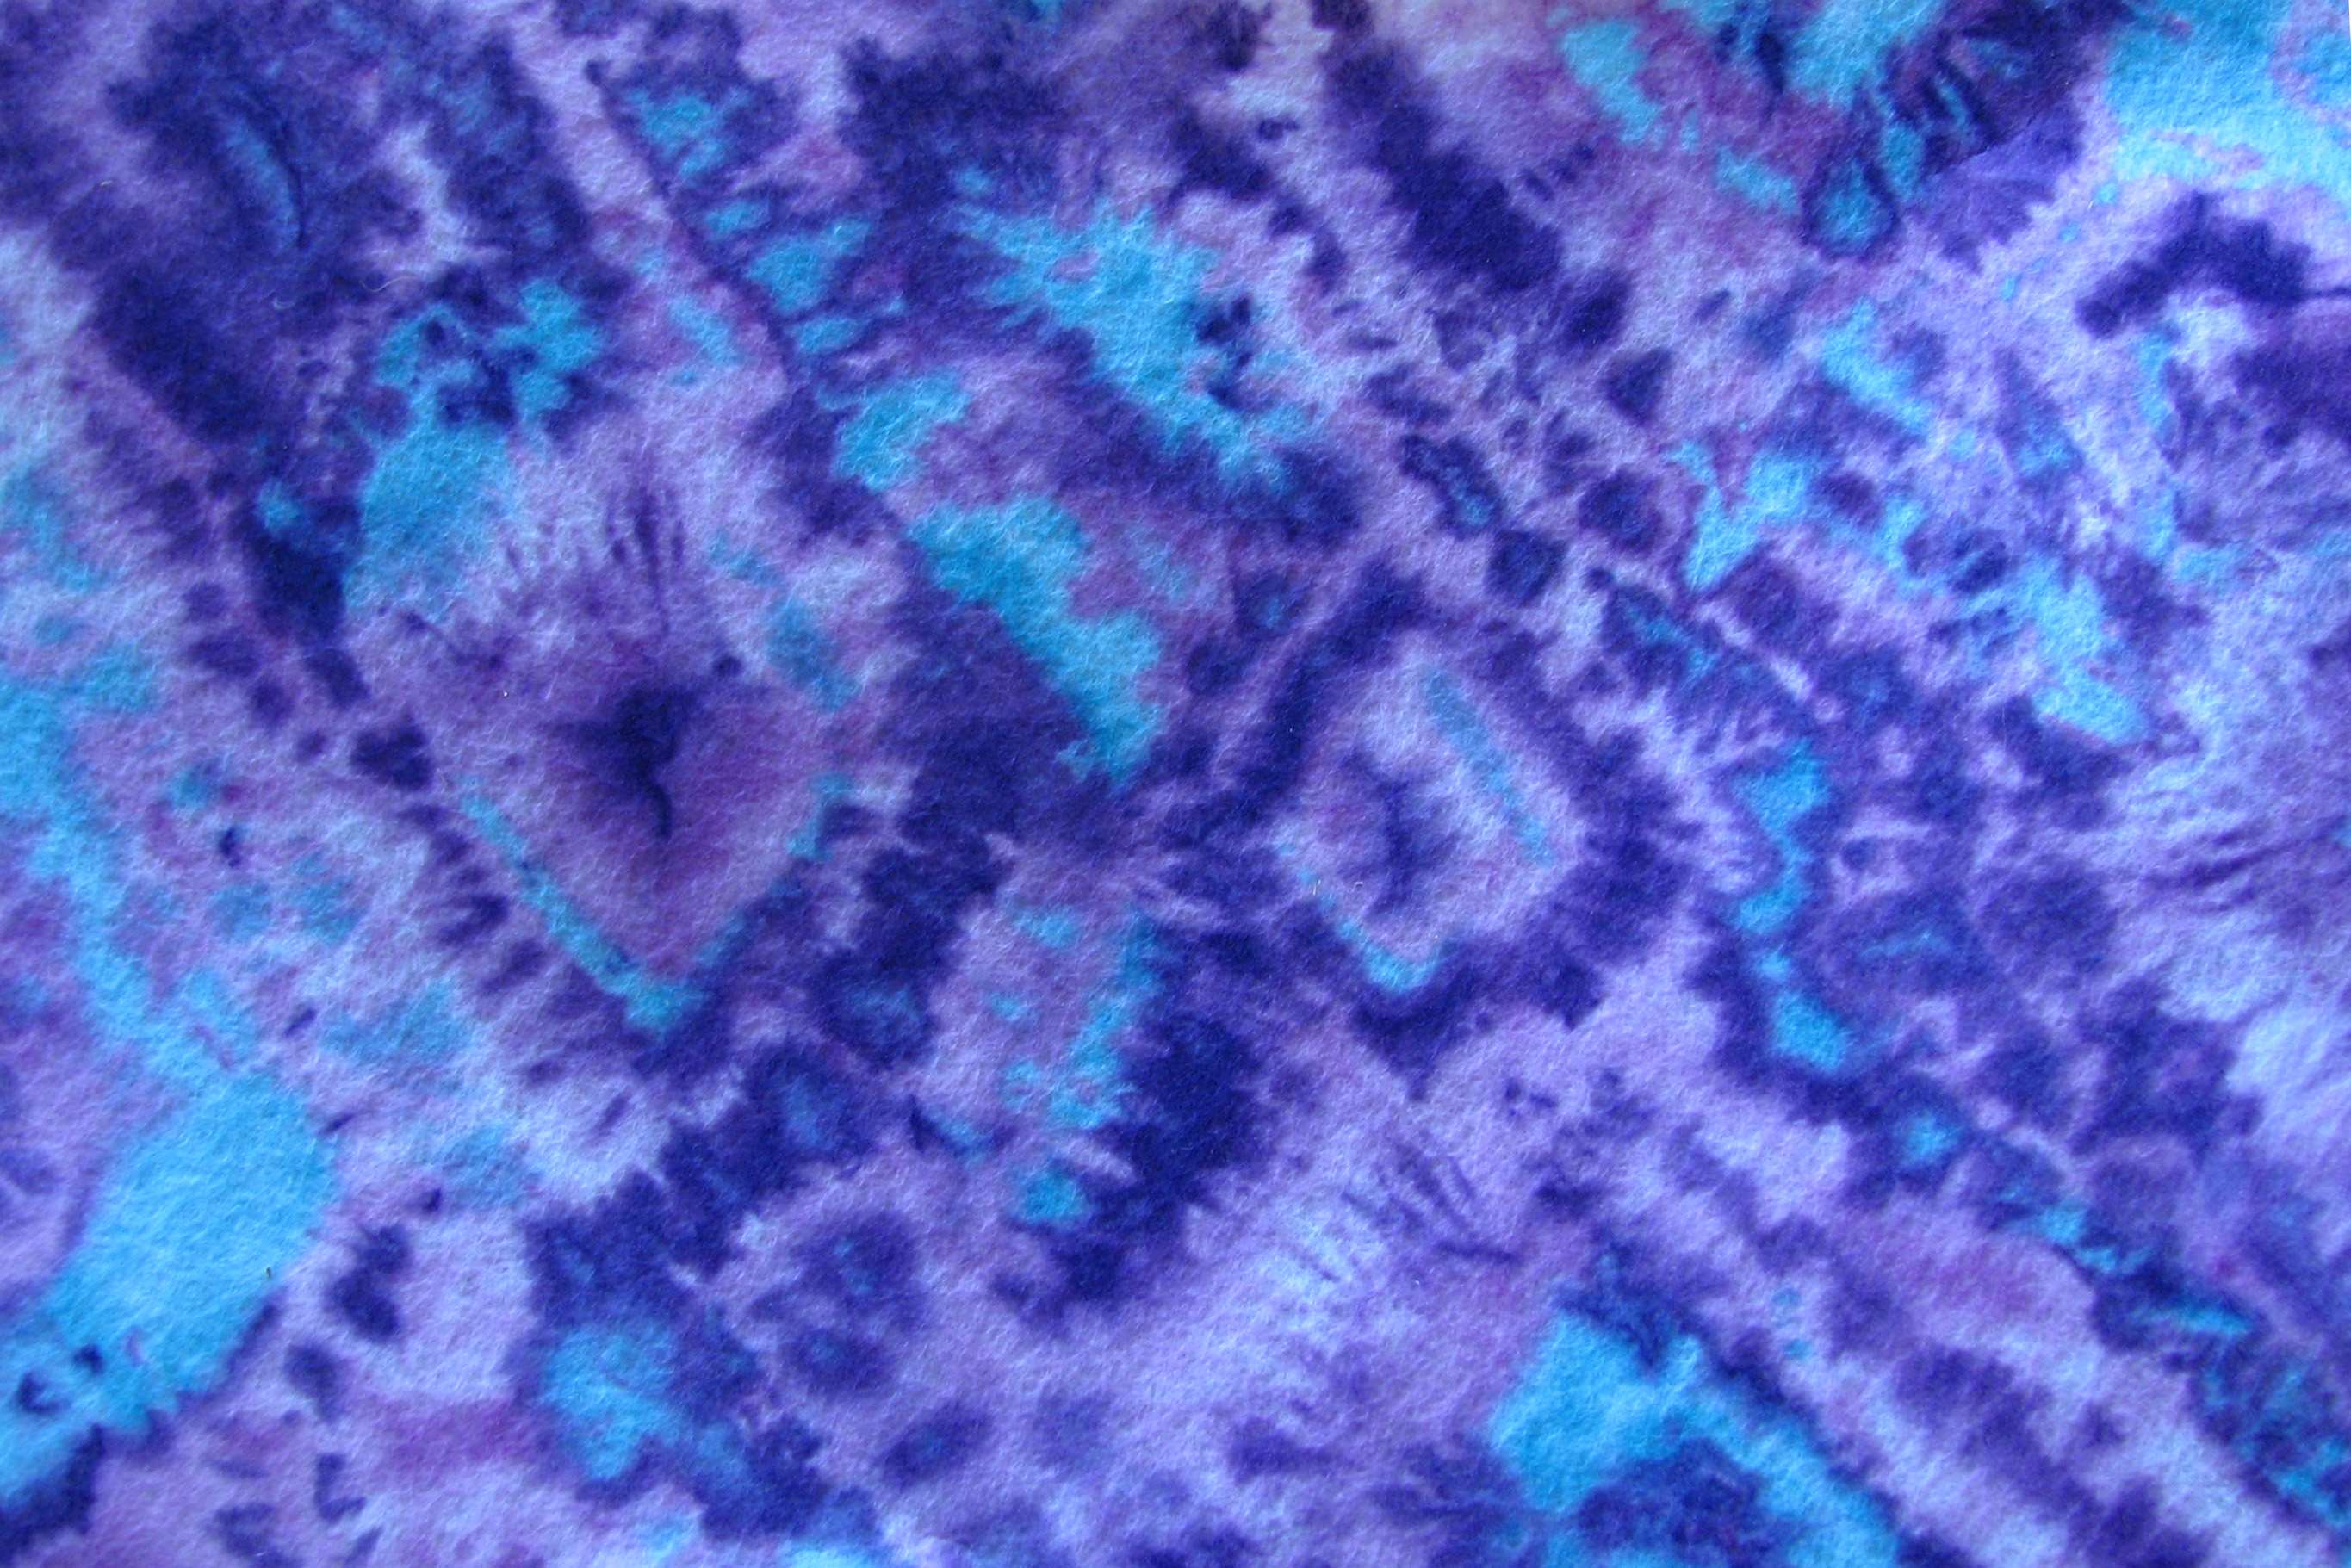 abstract, background, blue, paper, pattern, purple, tie dye, turquoise, violet Gallery HD Wallpaper